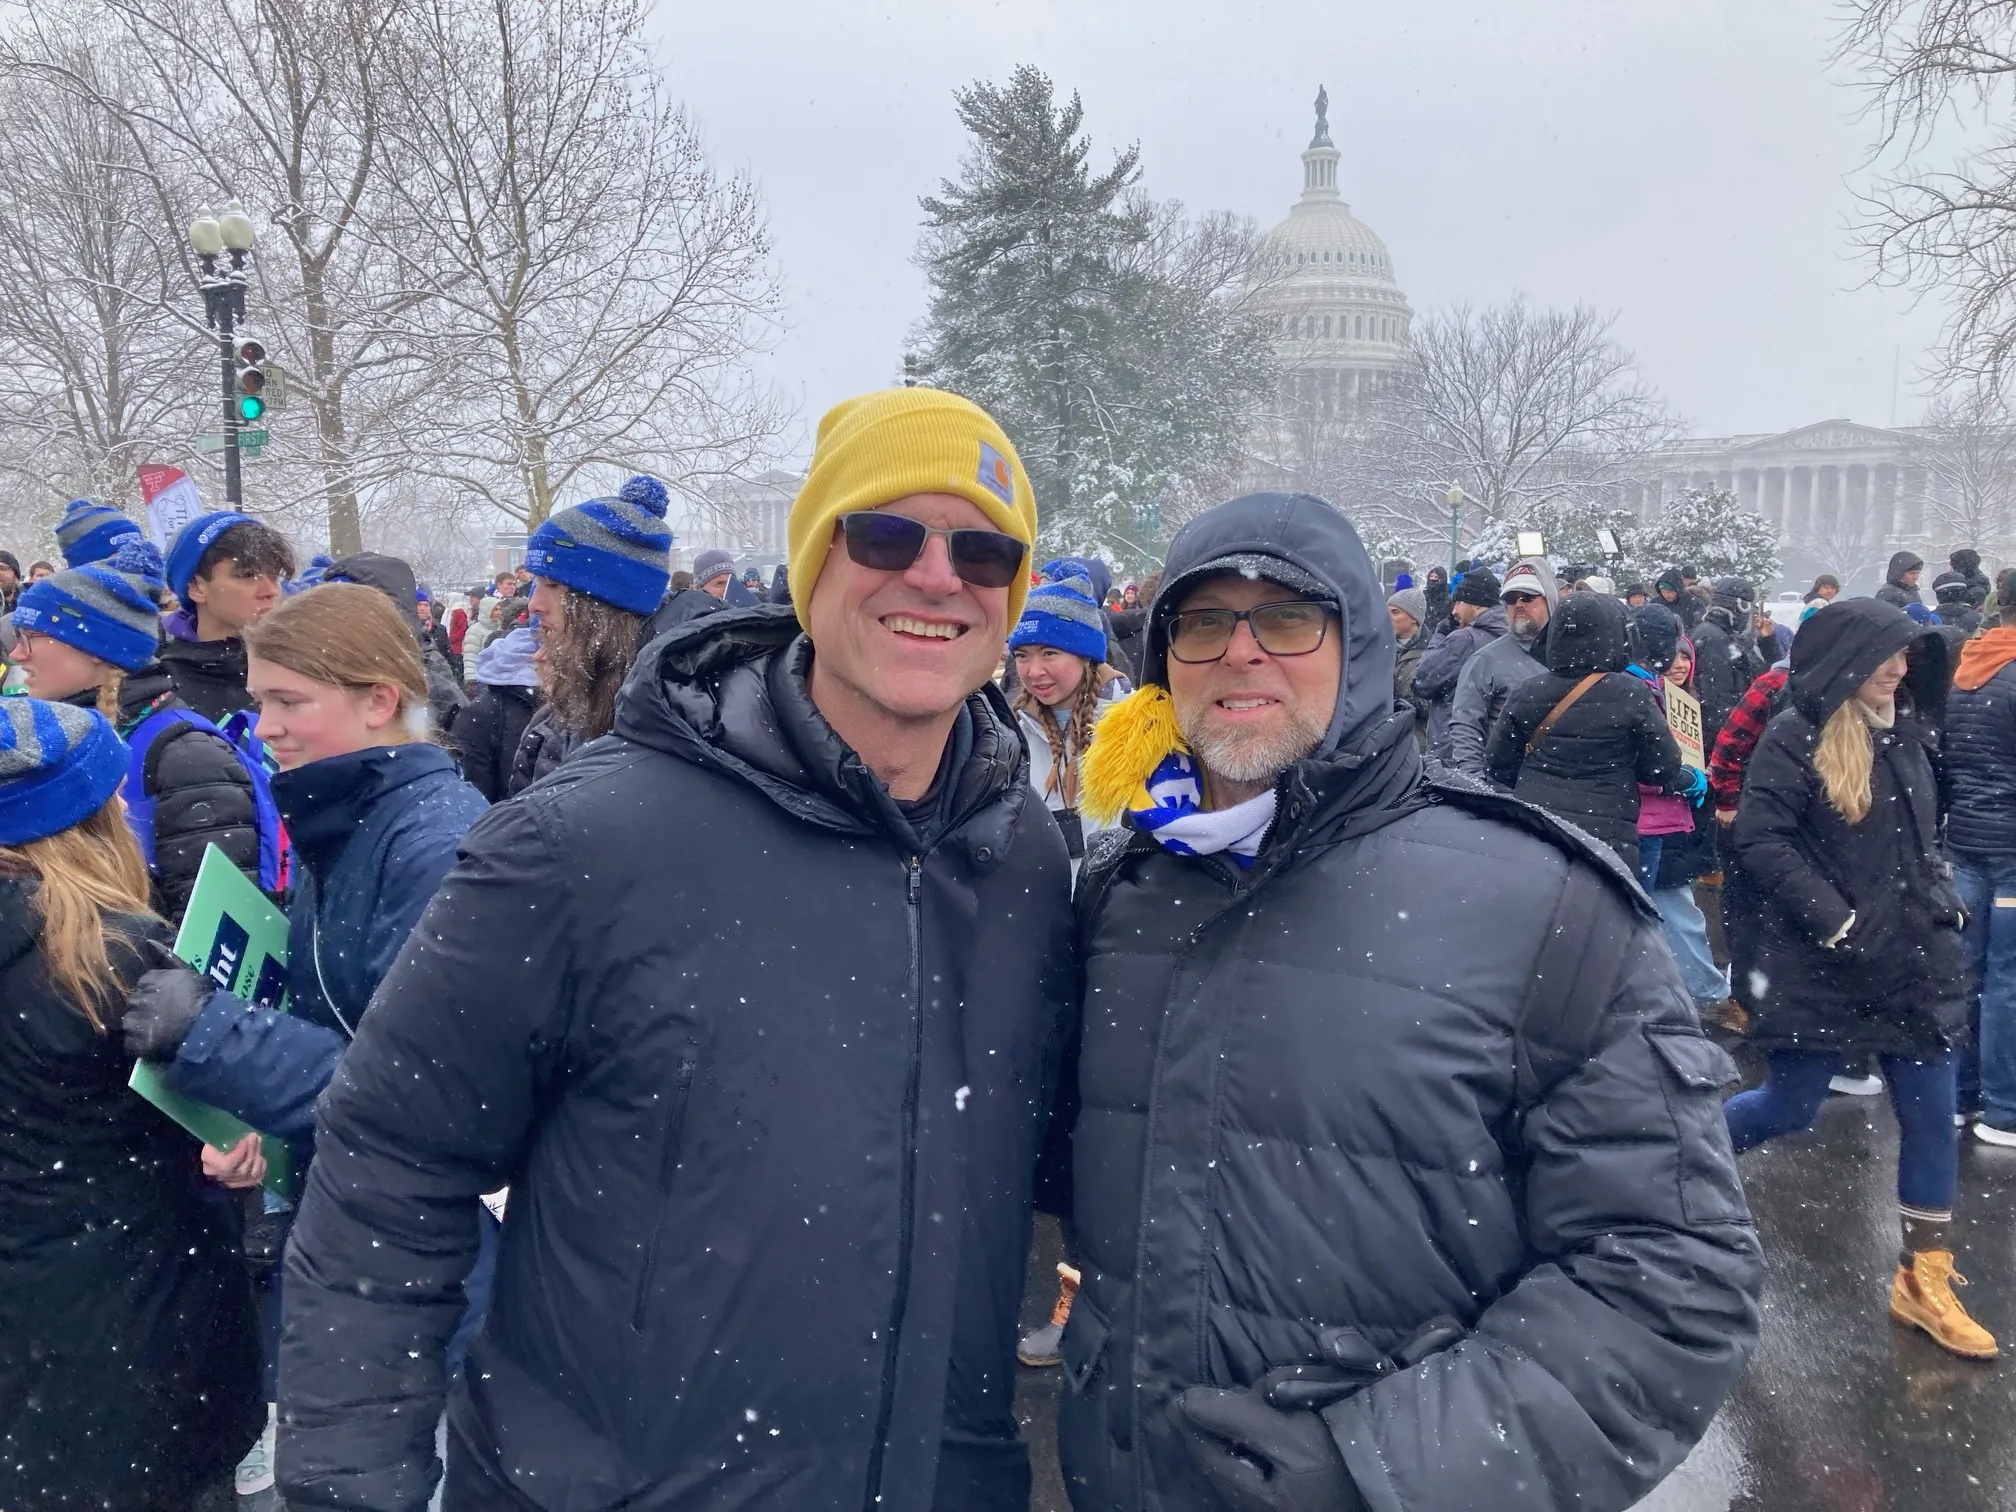 University of Michigan Wolverines coach Jim Harbaugh at the March for Life in Washington, D.C., on Jan. 19, 2024, pictured with Tim Shipe, a high school teacher from Florida (and lifelong Buckeye fan).?w=200&h=150